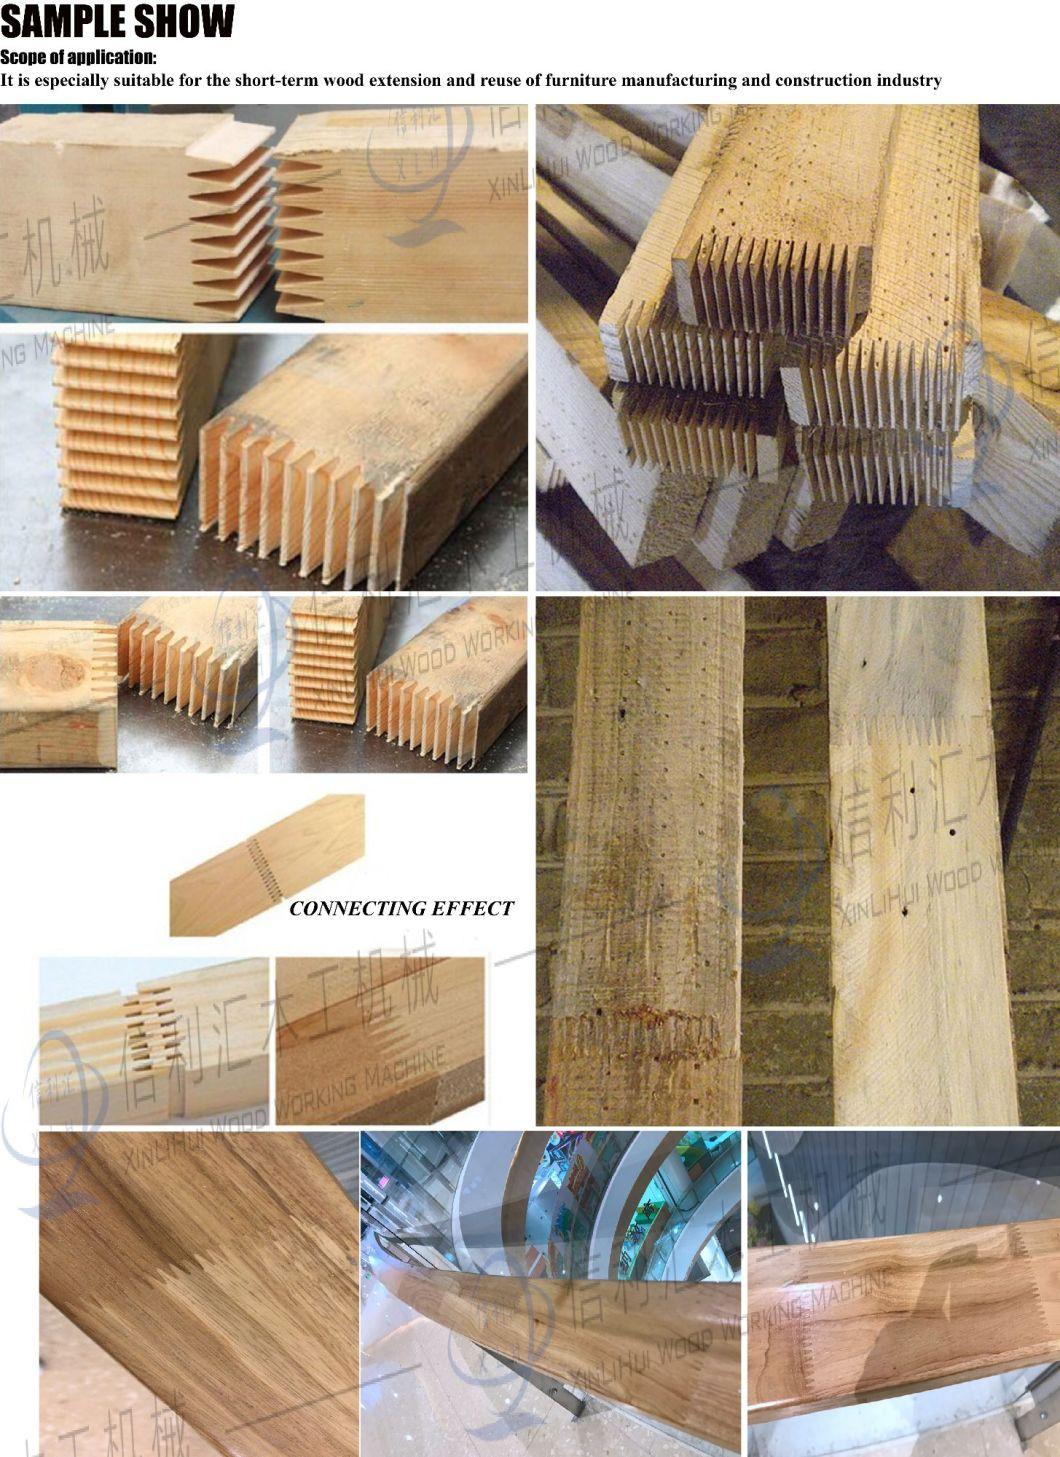 Procure a Finger Joint Machine Can Accommodate All Tropical Hardwood Products. Infeed Length Tension Tester or Machine on Outfeed.